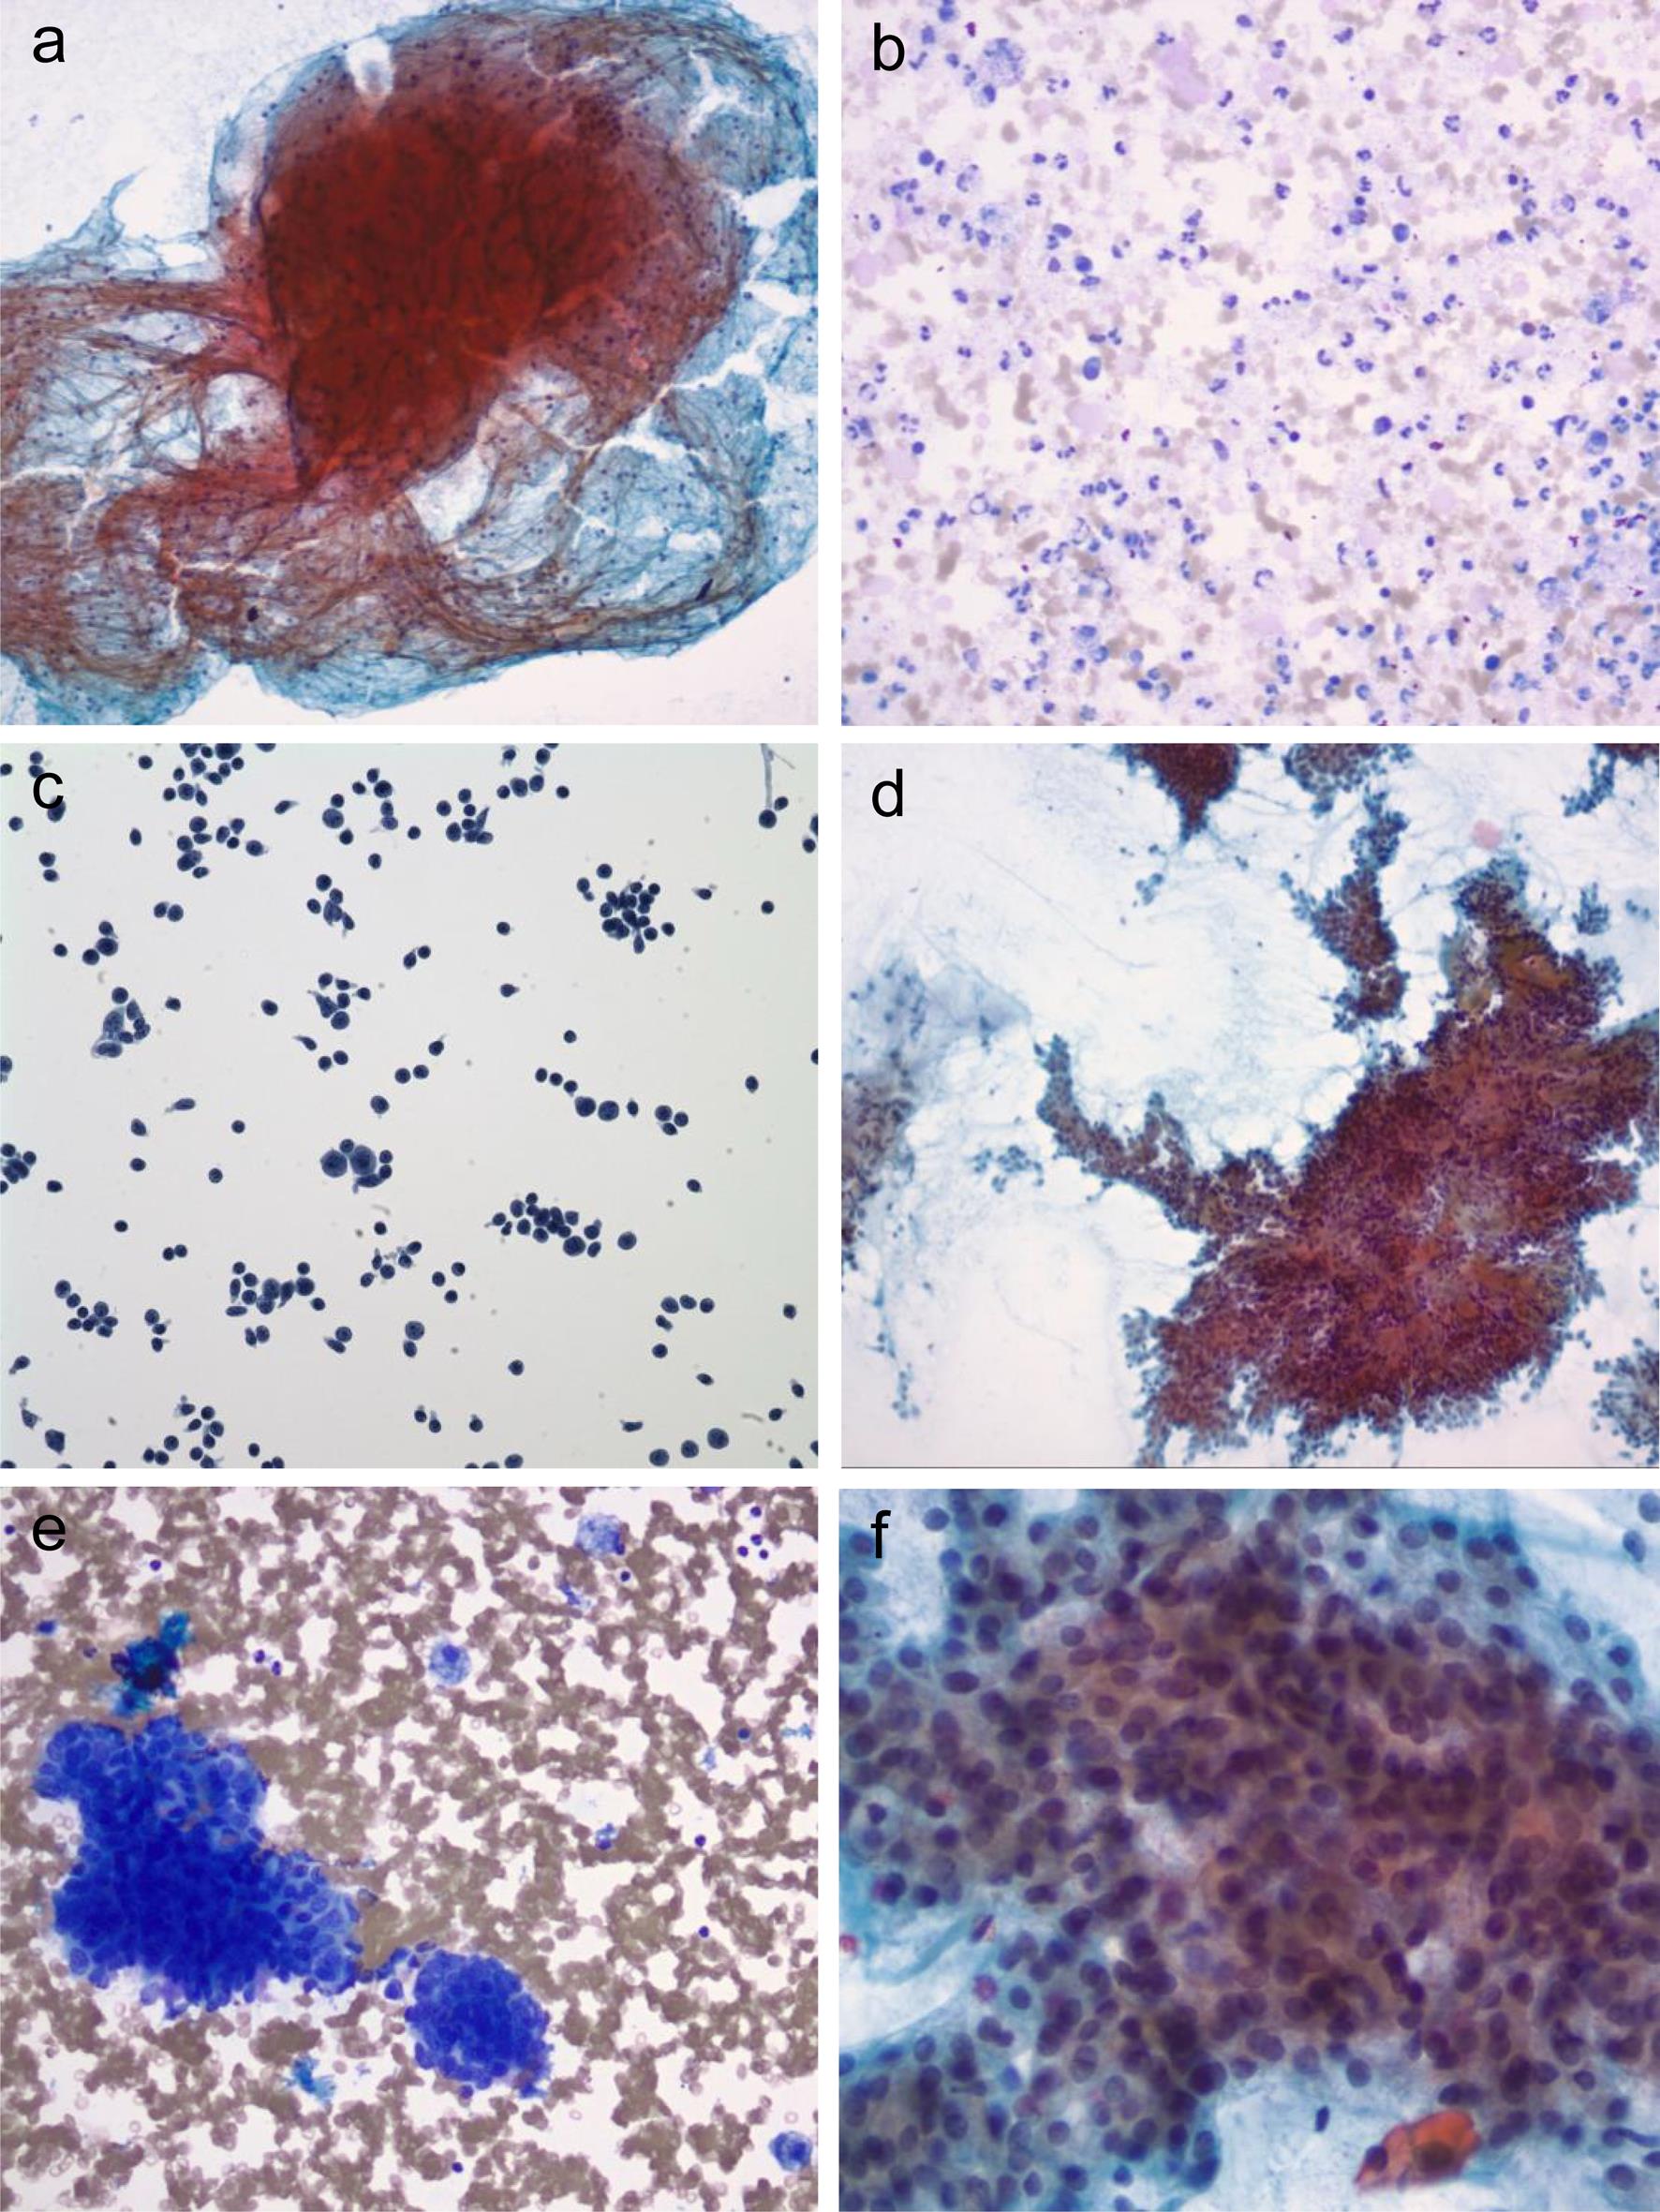 Representative examples in each diagnostic category of the MSRSGC.